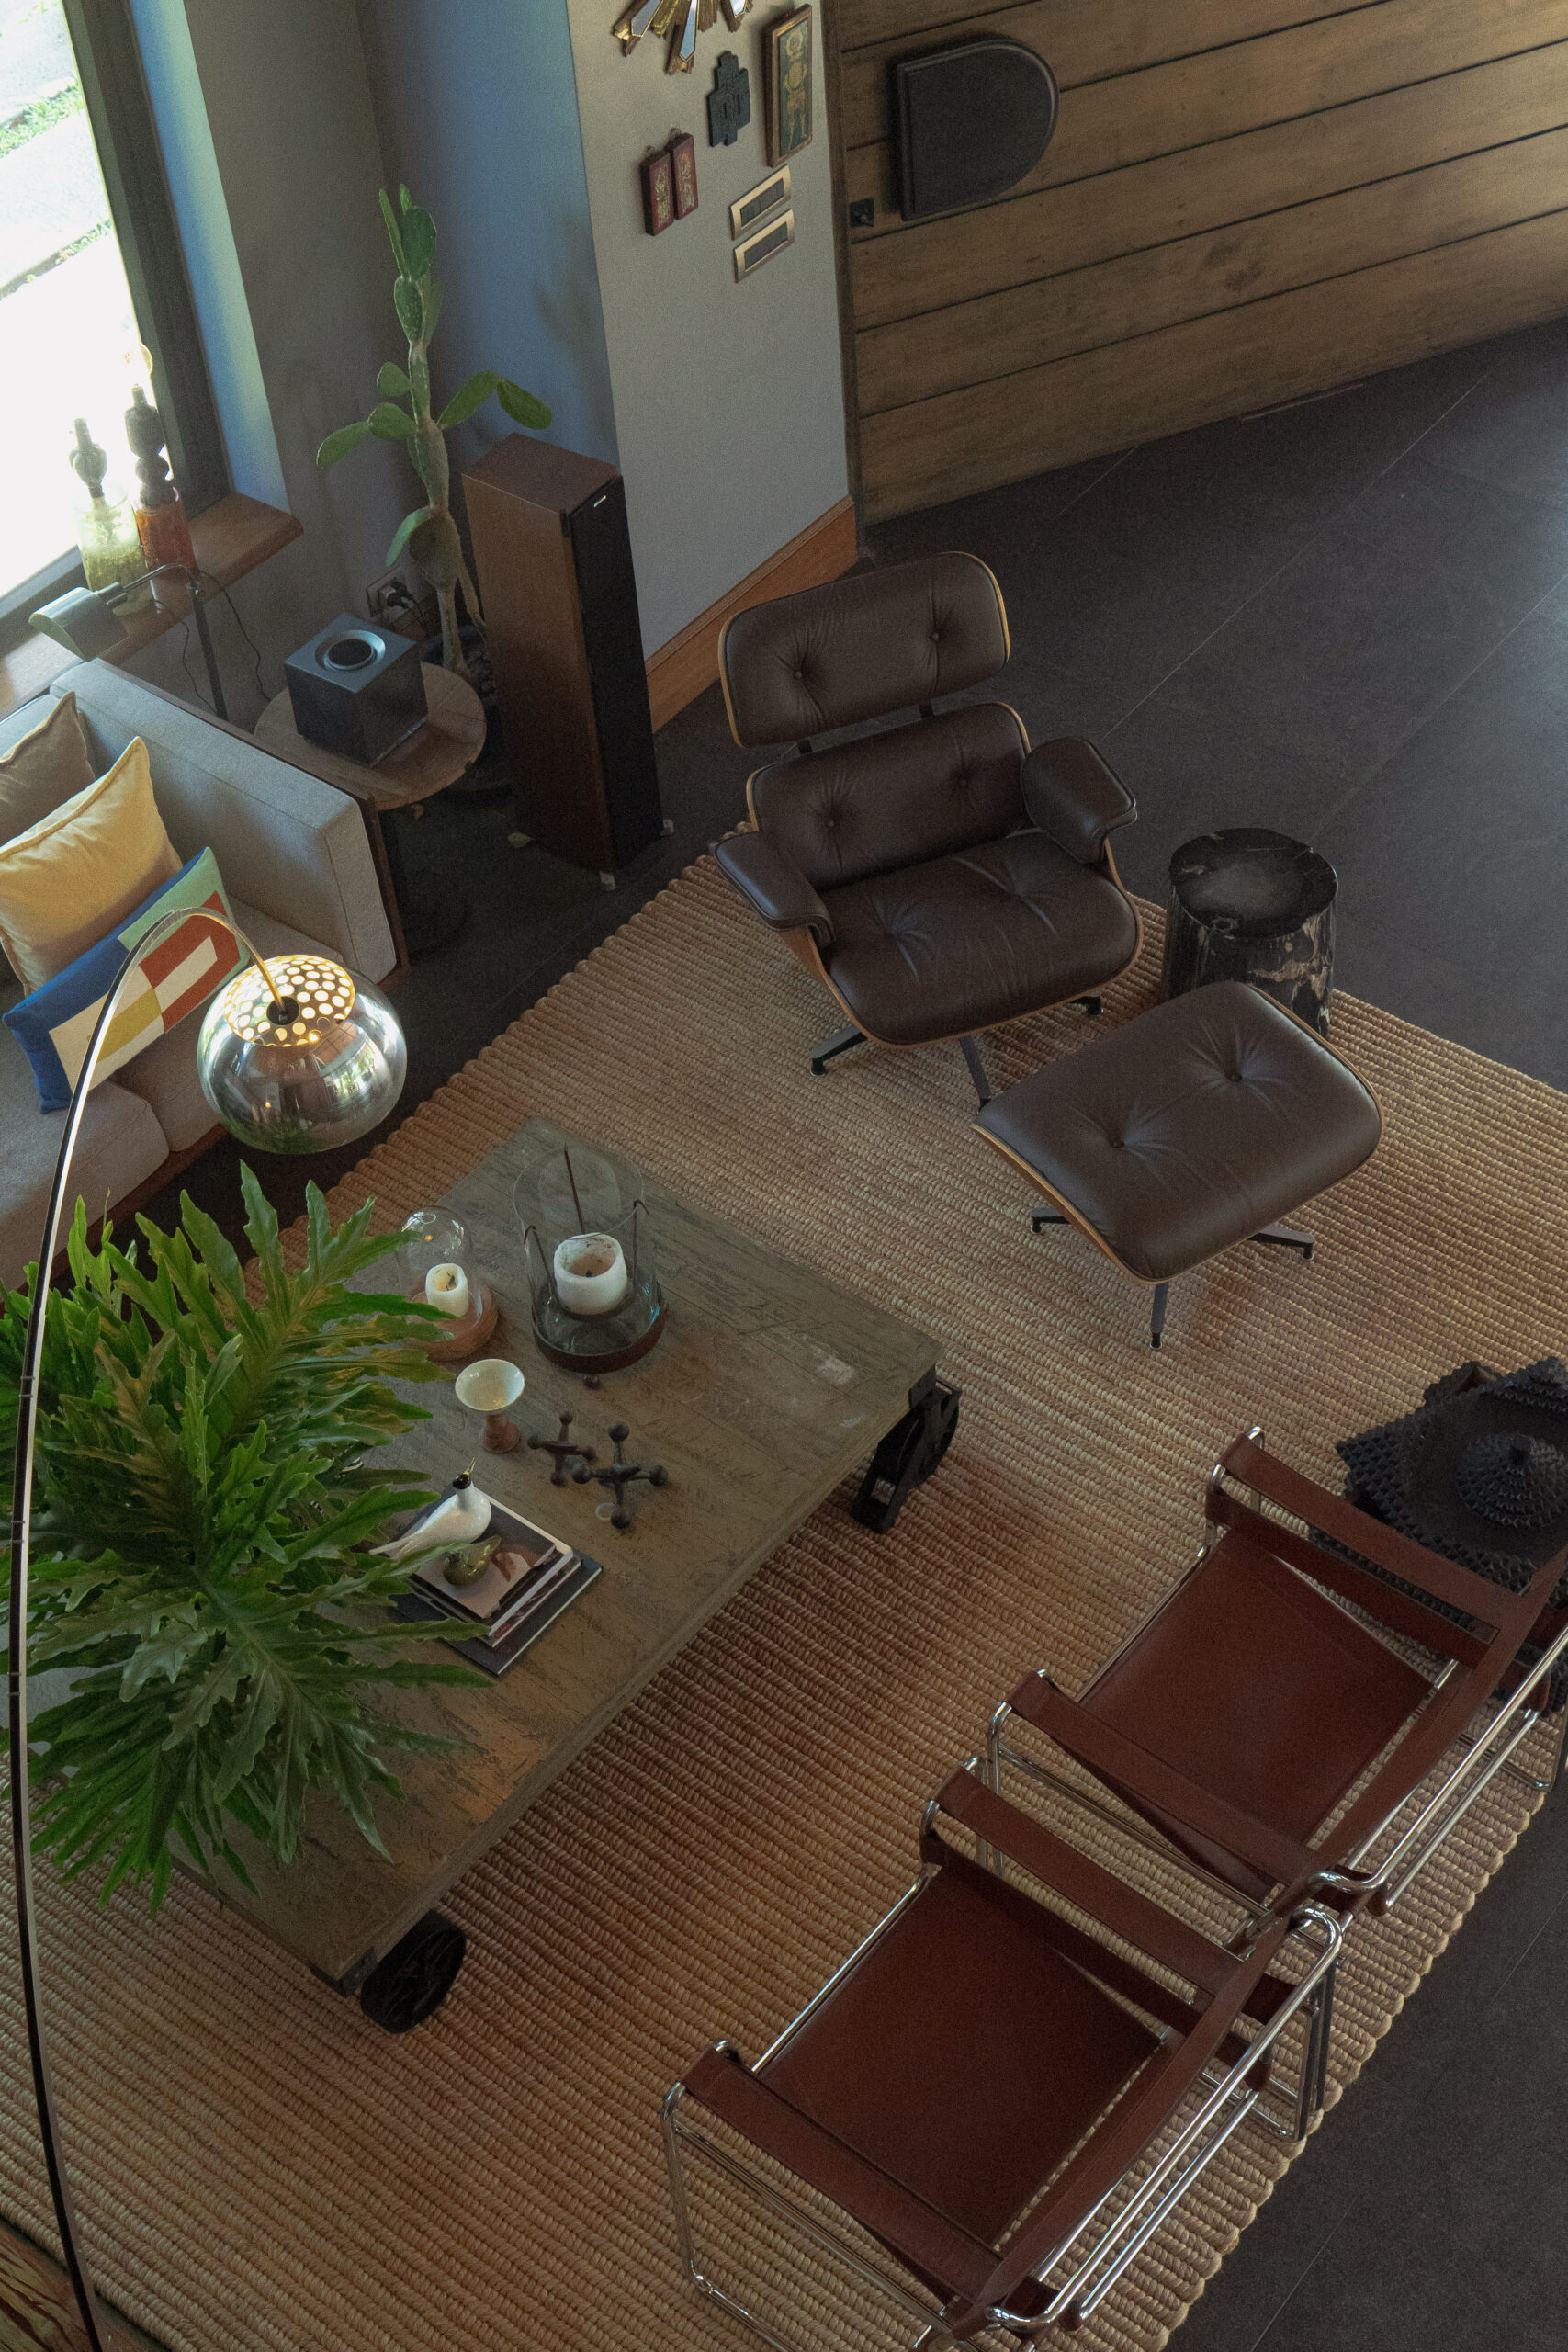 Eames and Wassily chairs